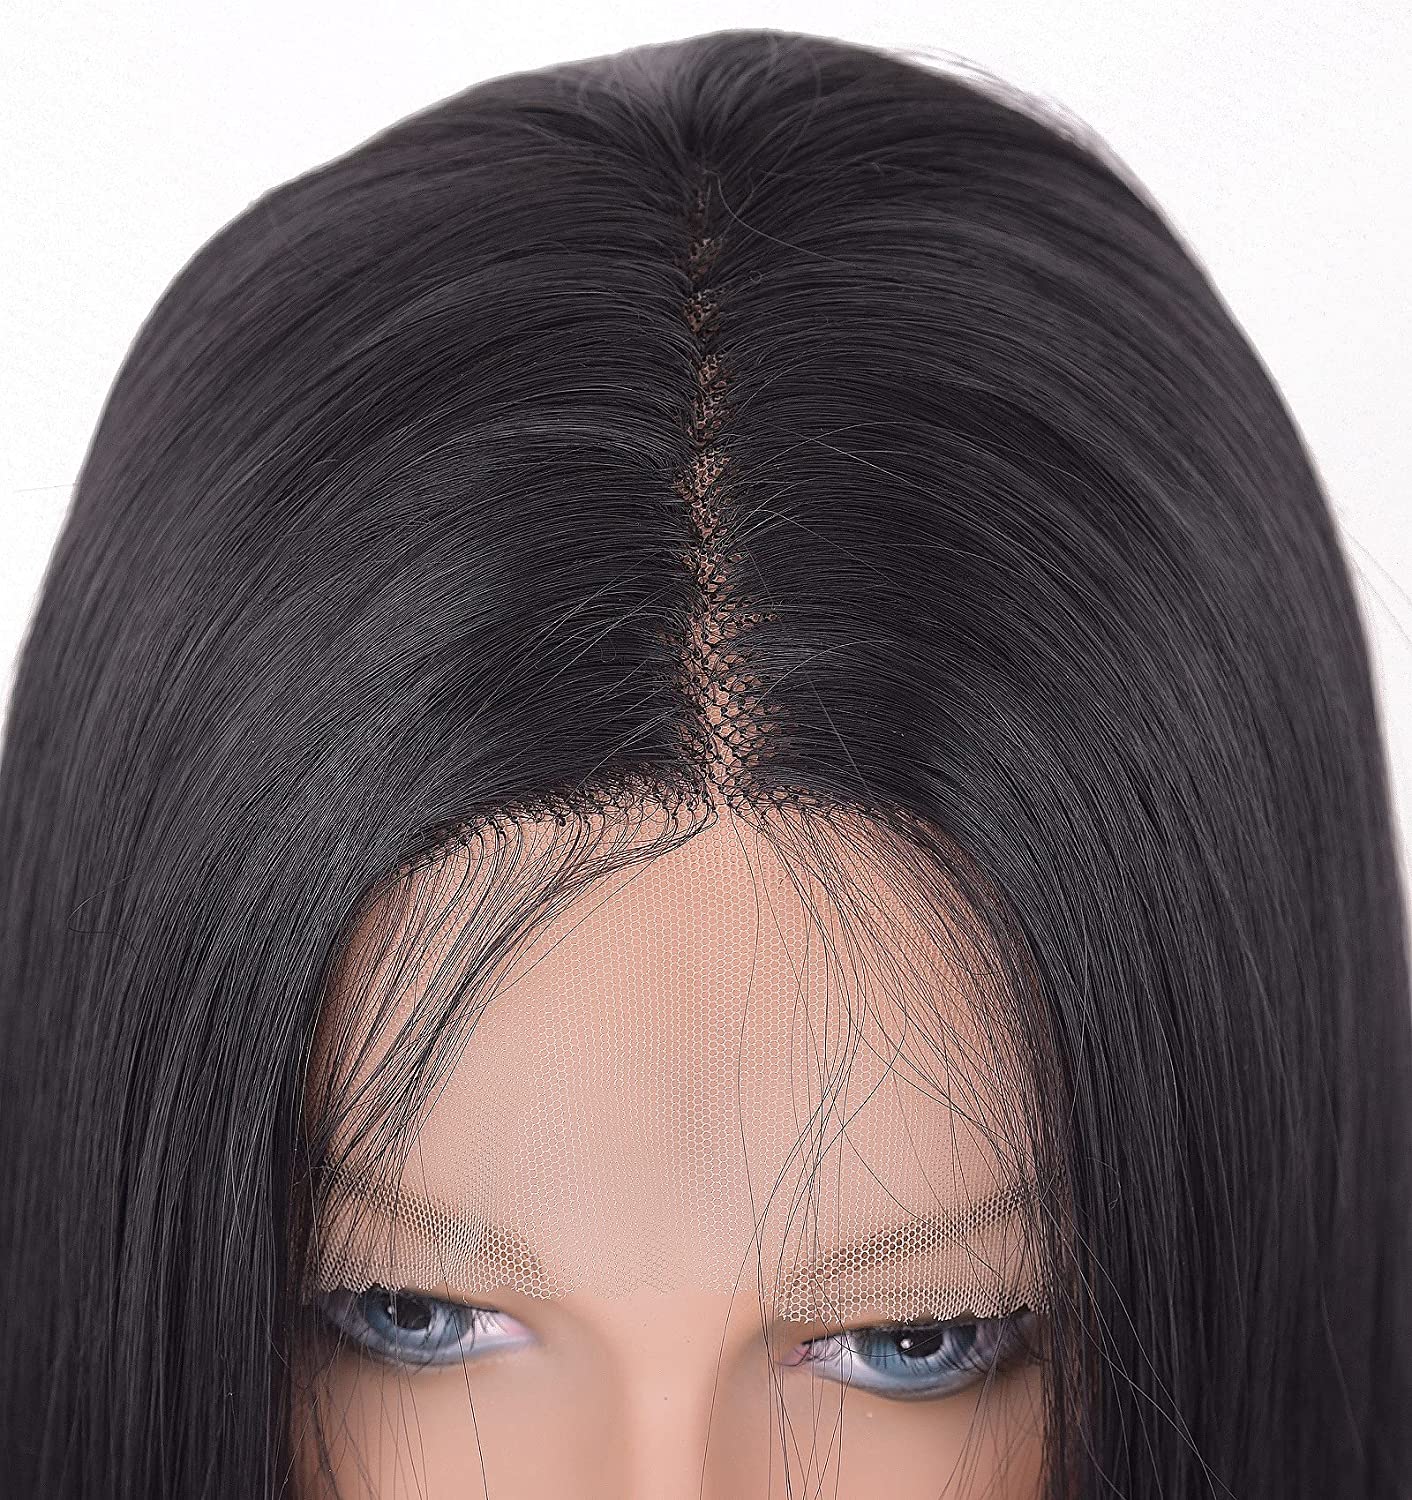  lace synthetic wig,lace front wigs for women,black hair wig,afro wig women,afro wig for women,black wigs for women,glueless lace front wigs,synthetic wigs,lace front wigs synthetic → black synthetic wig,long black wig,black wig for women,synthetic lace front wigs for women,wig synthetic,black hair wigs for women,black straight wig,black lace front wigs for women